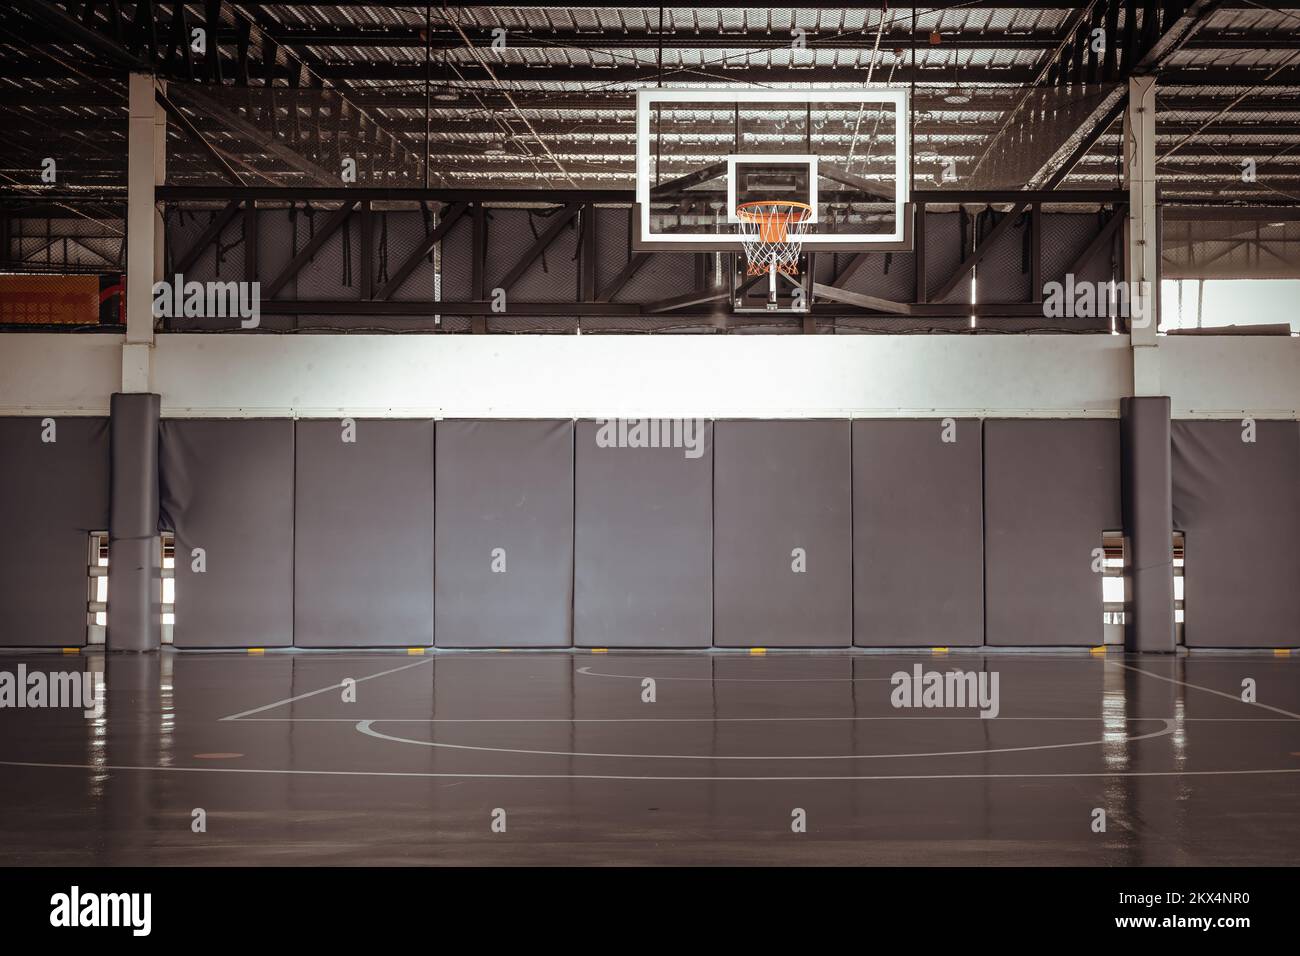 Bangkok, Thailand - Oct 10, 2020 : Basketball courts on rooftop of Parking  lot building. View of Basketball fiberglass backboard with orange basketbal  Stock Photo - Alamy